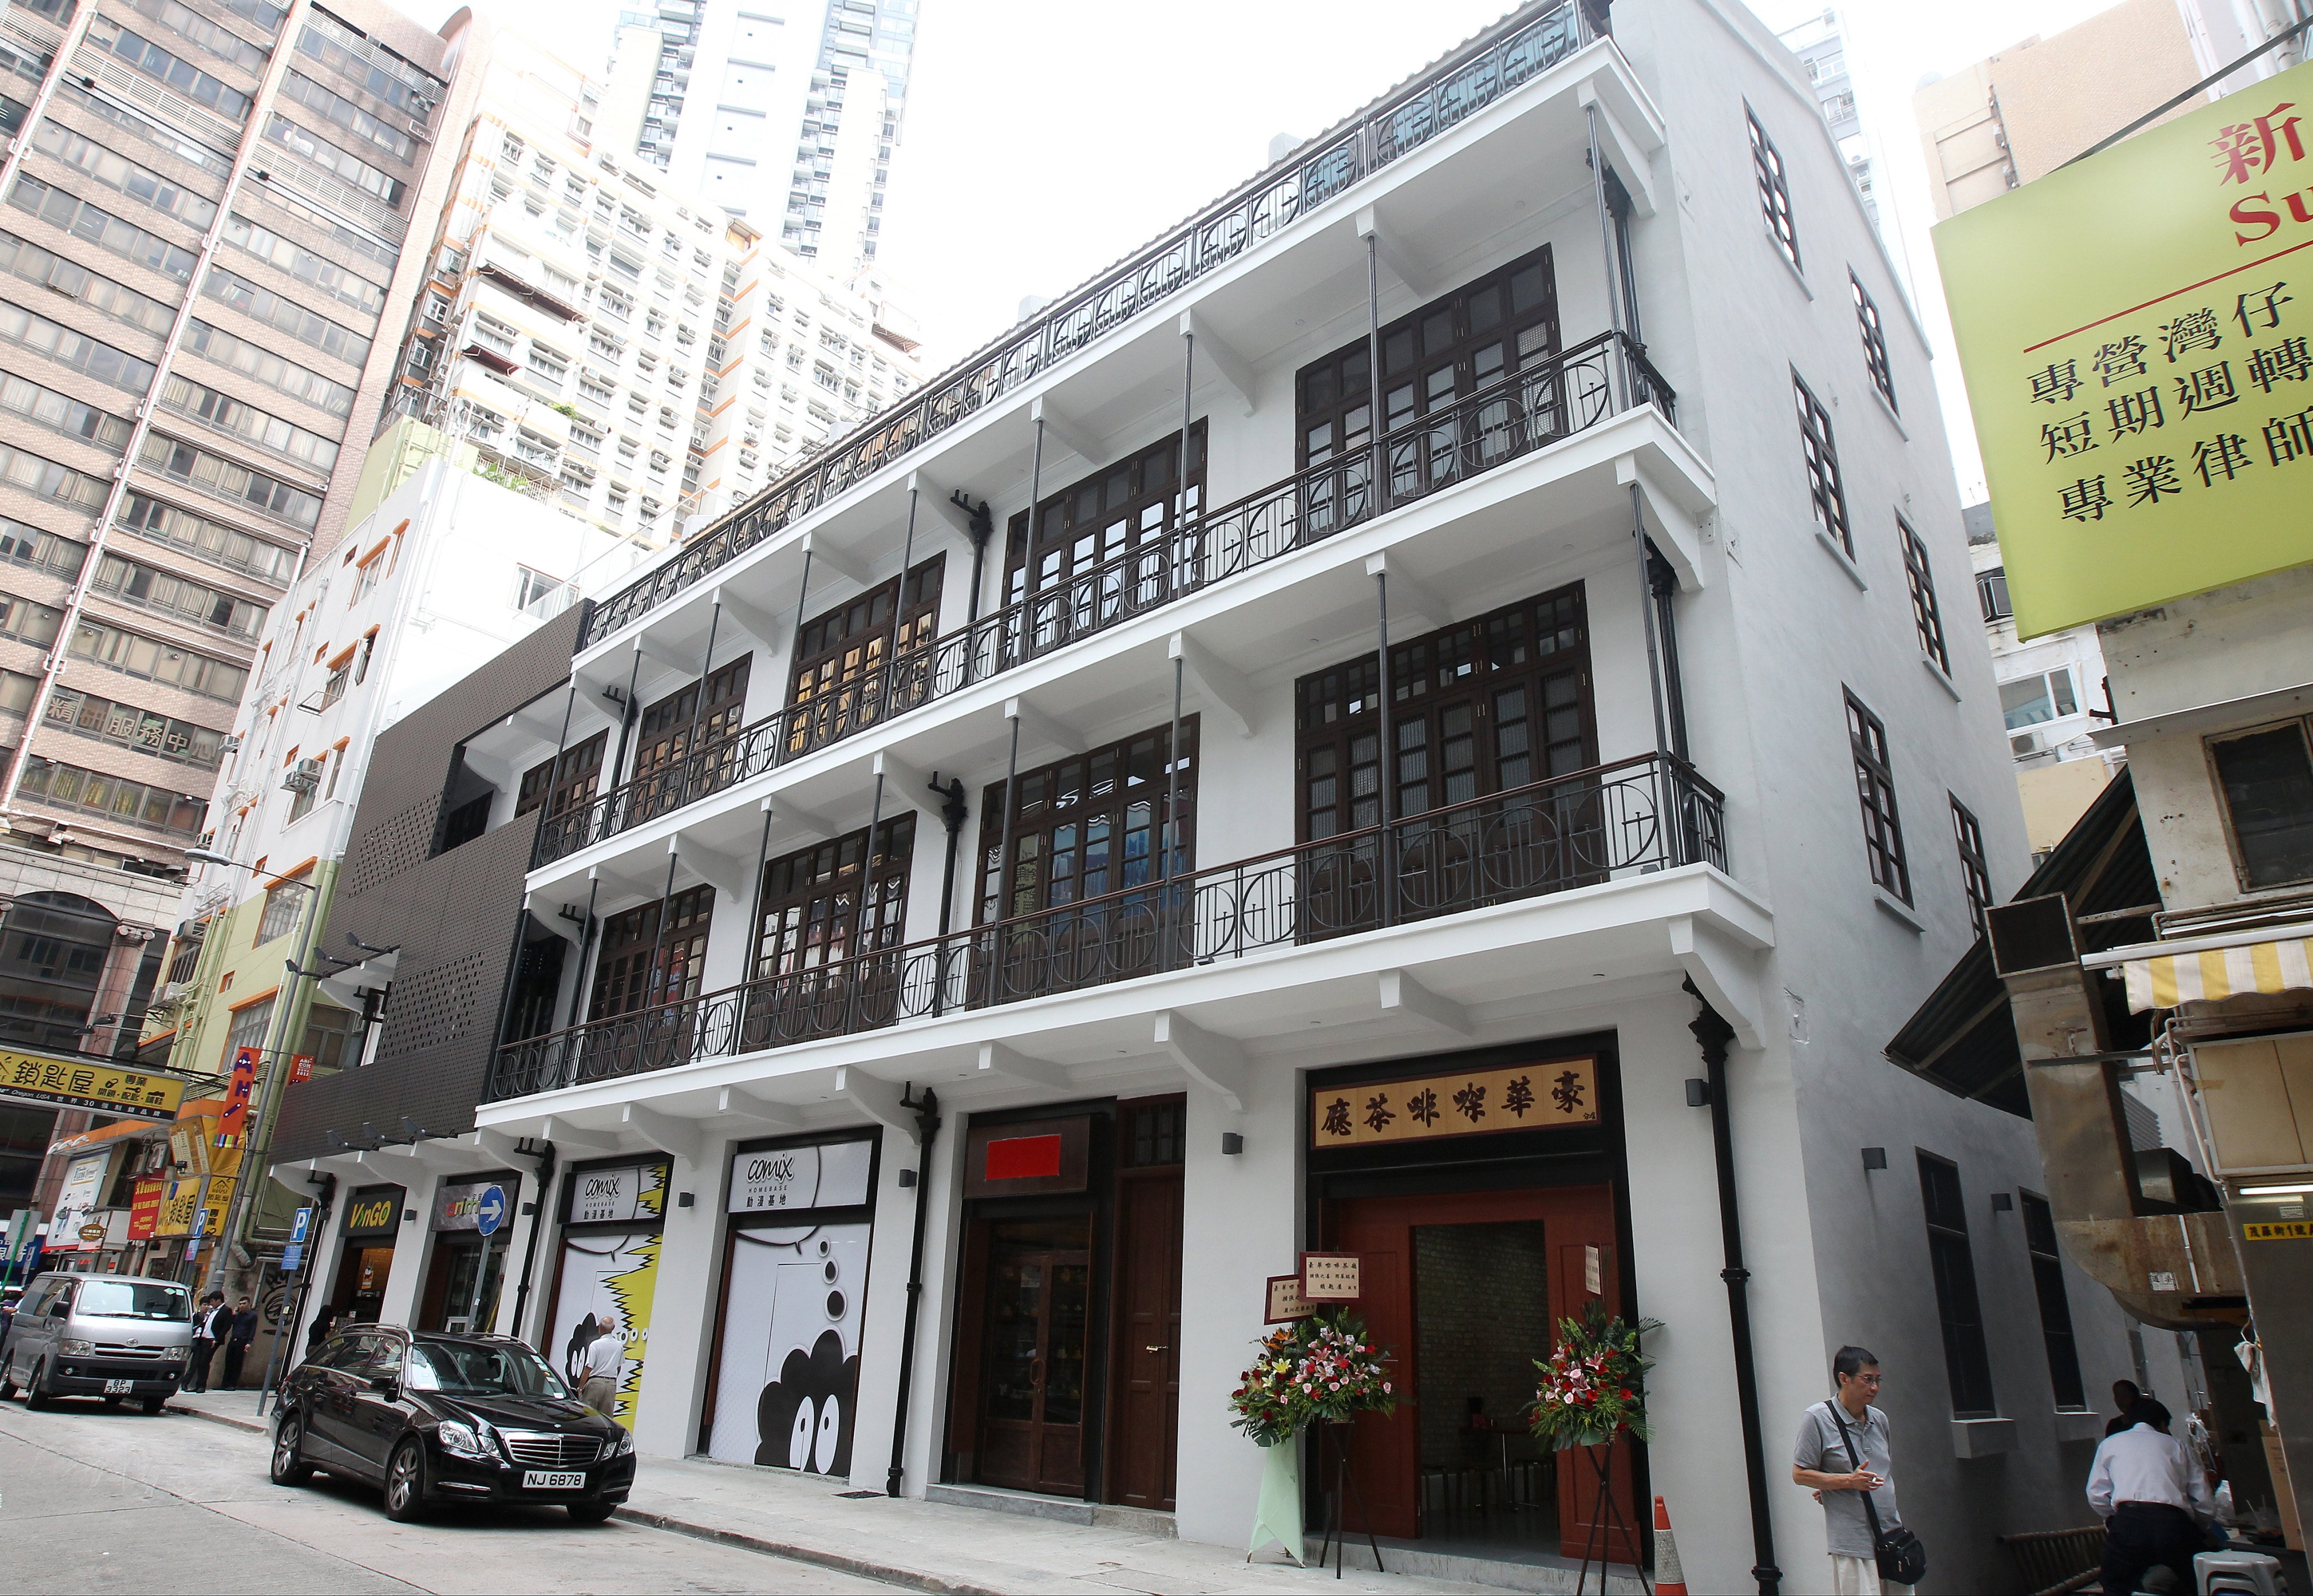 The new museum dedicated to Hong Kong’s literature will be housed on the third floor of 7 Mallory Street in Wan Chai. Photo: SCMP